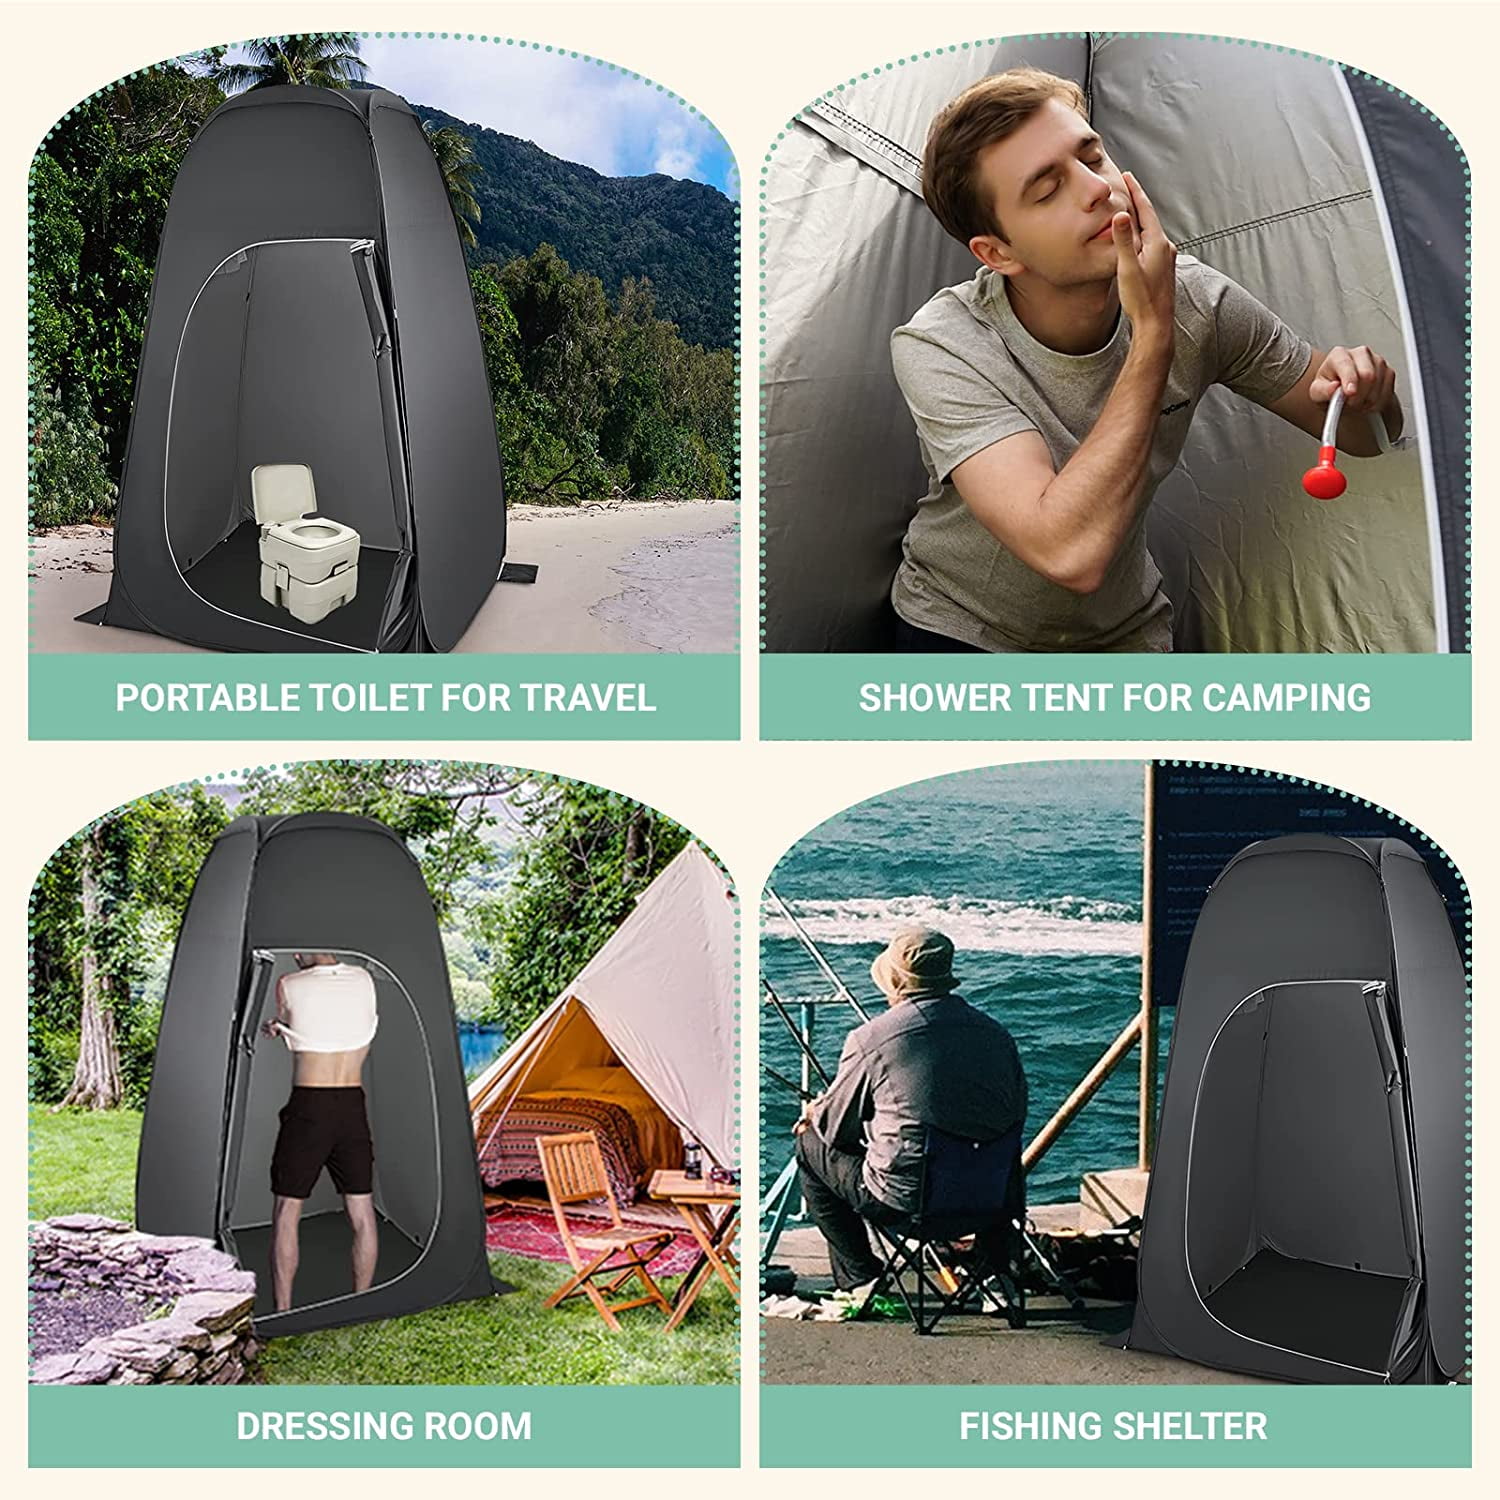 Portable camping toilet with pop up privacy tent – Hipcamp General Store